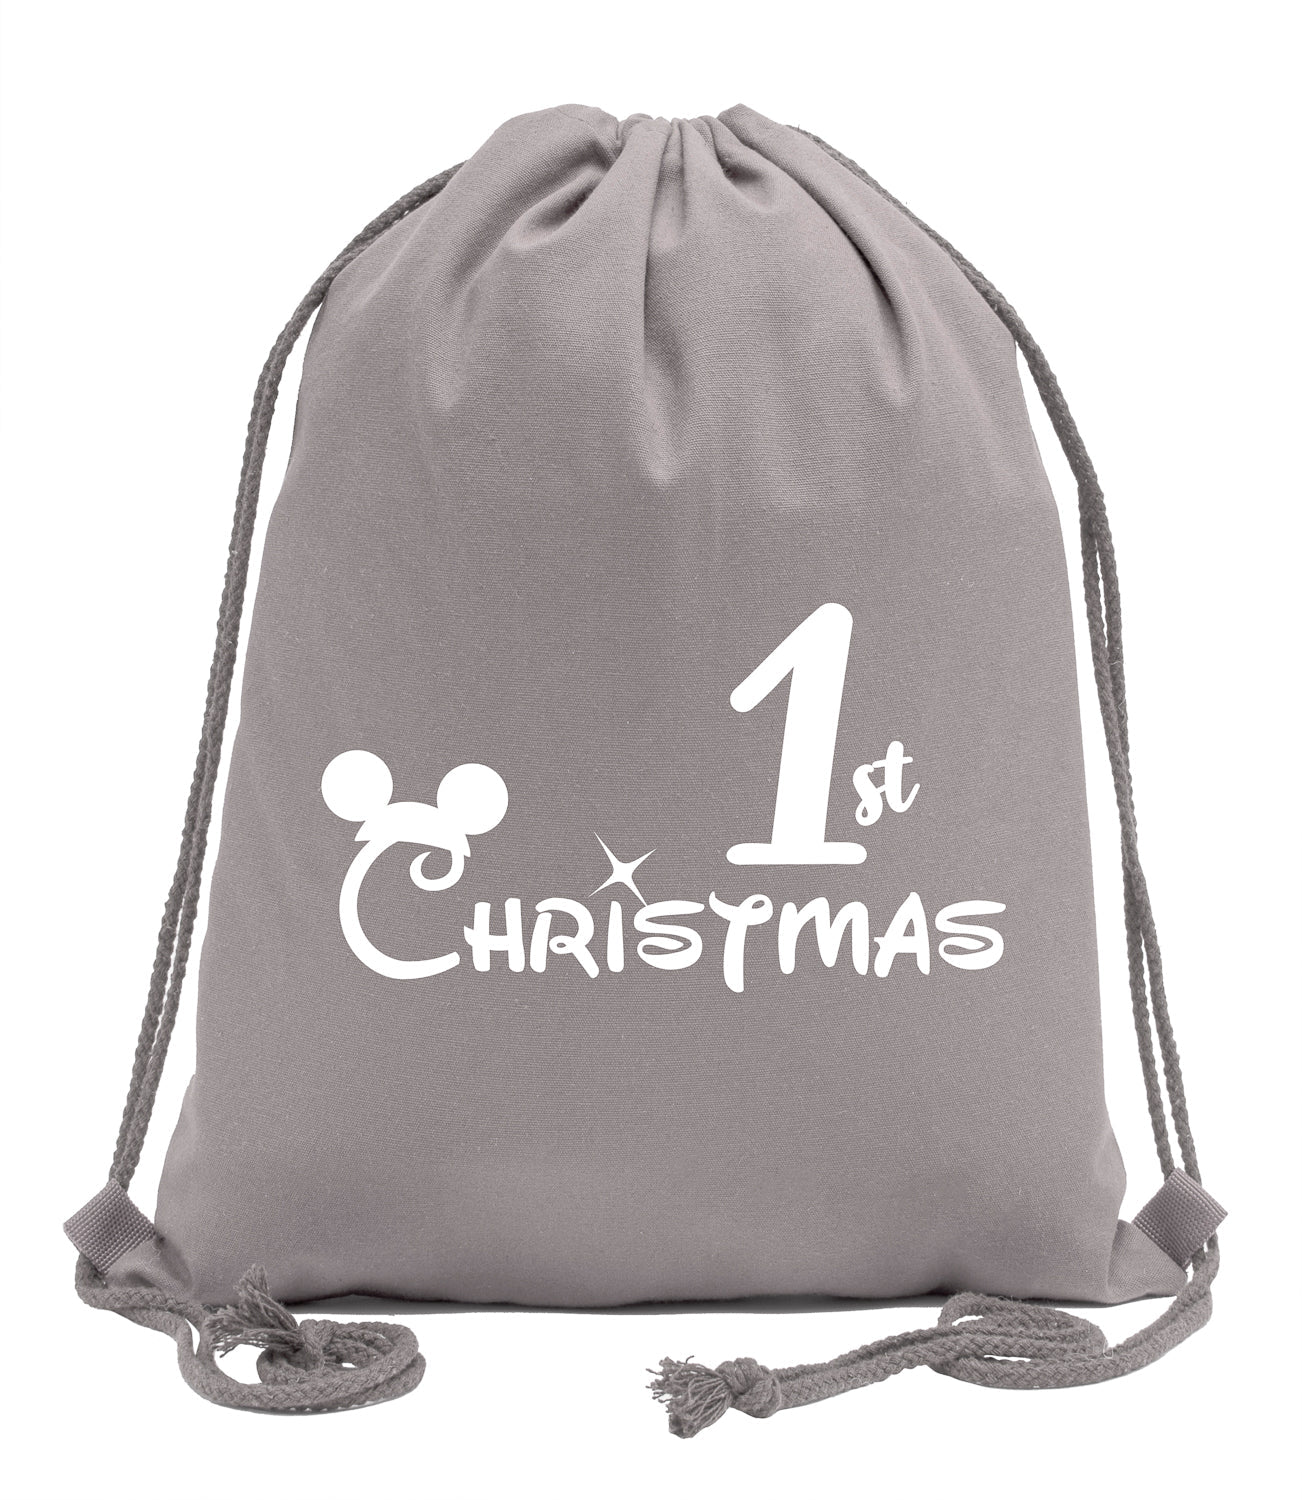 Kids Backpacks & Lunch Boxes  Minnie Mouse and Friends Drawstring